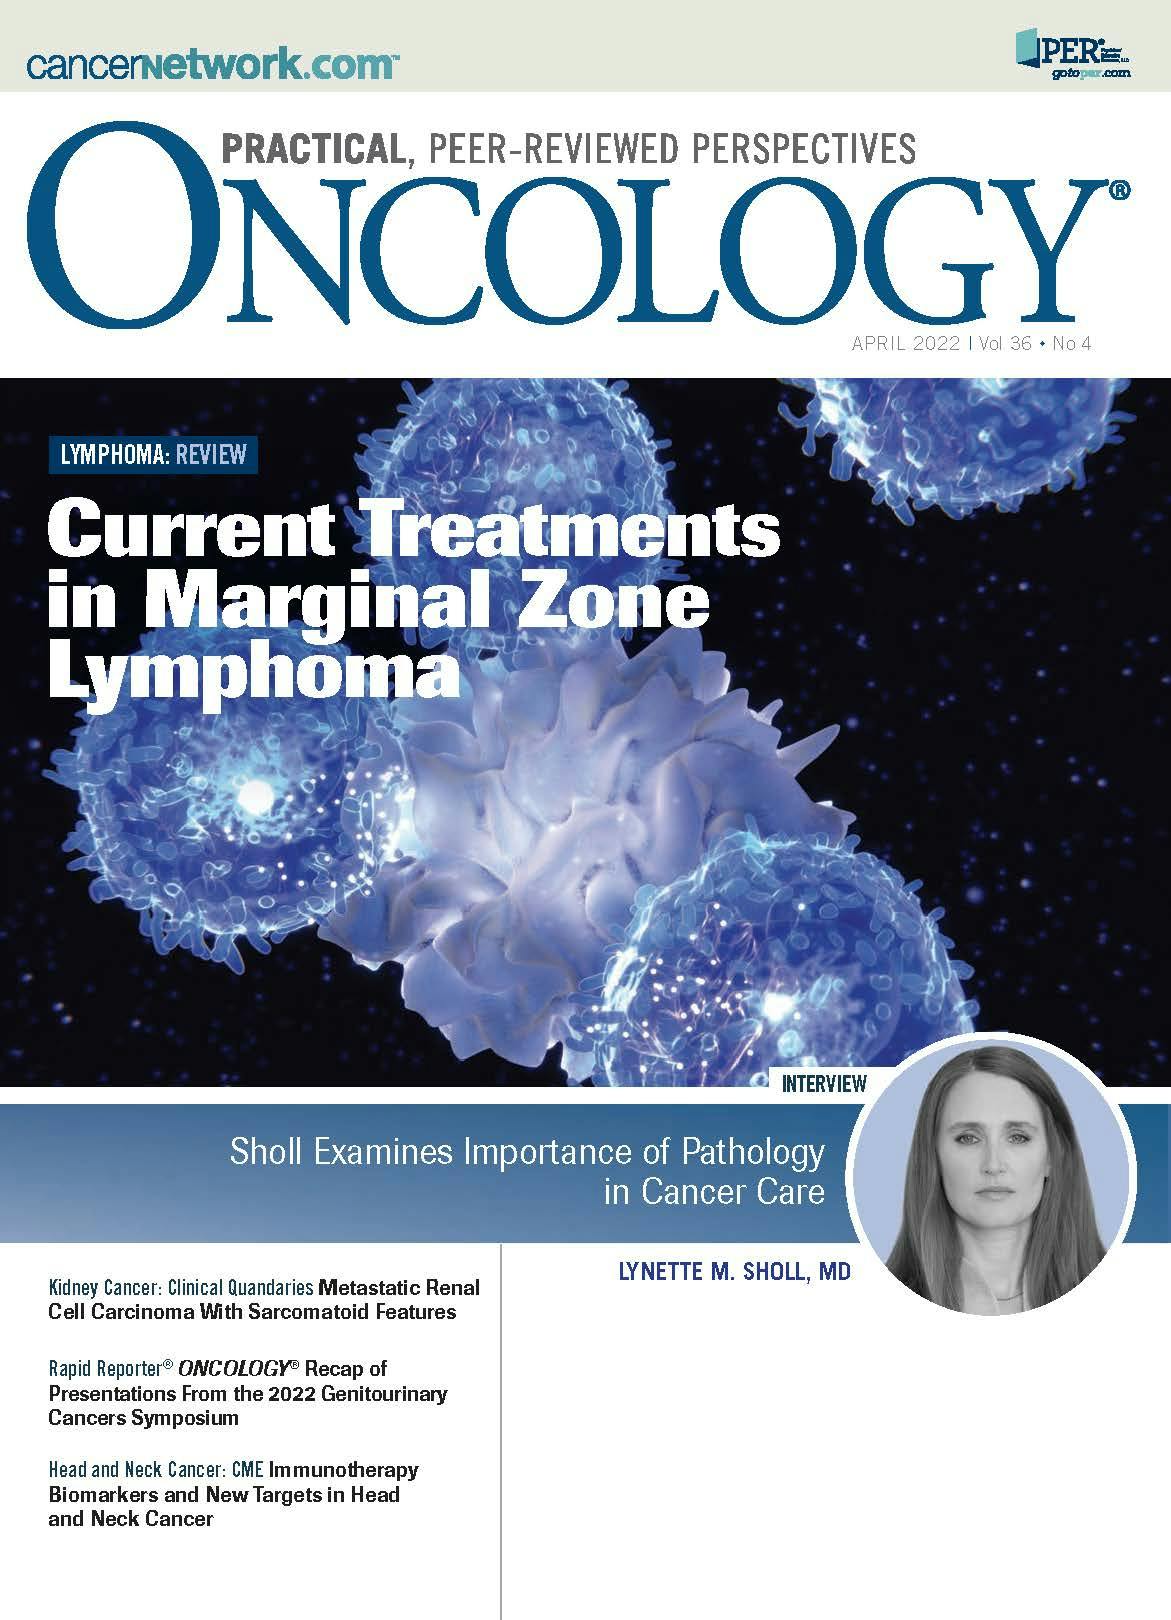 ONCOLOGY Vol 36, Issue 3